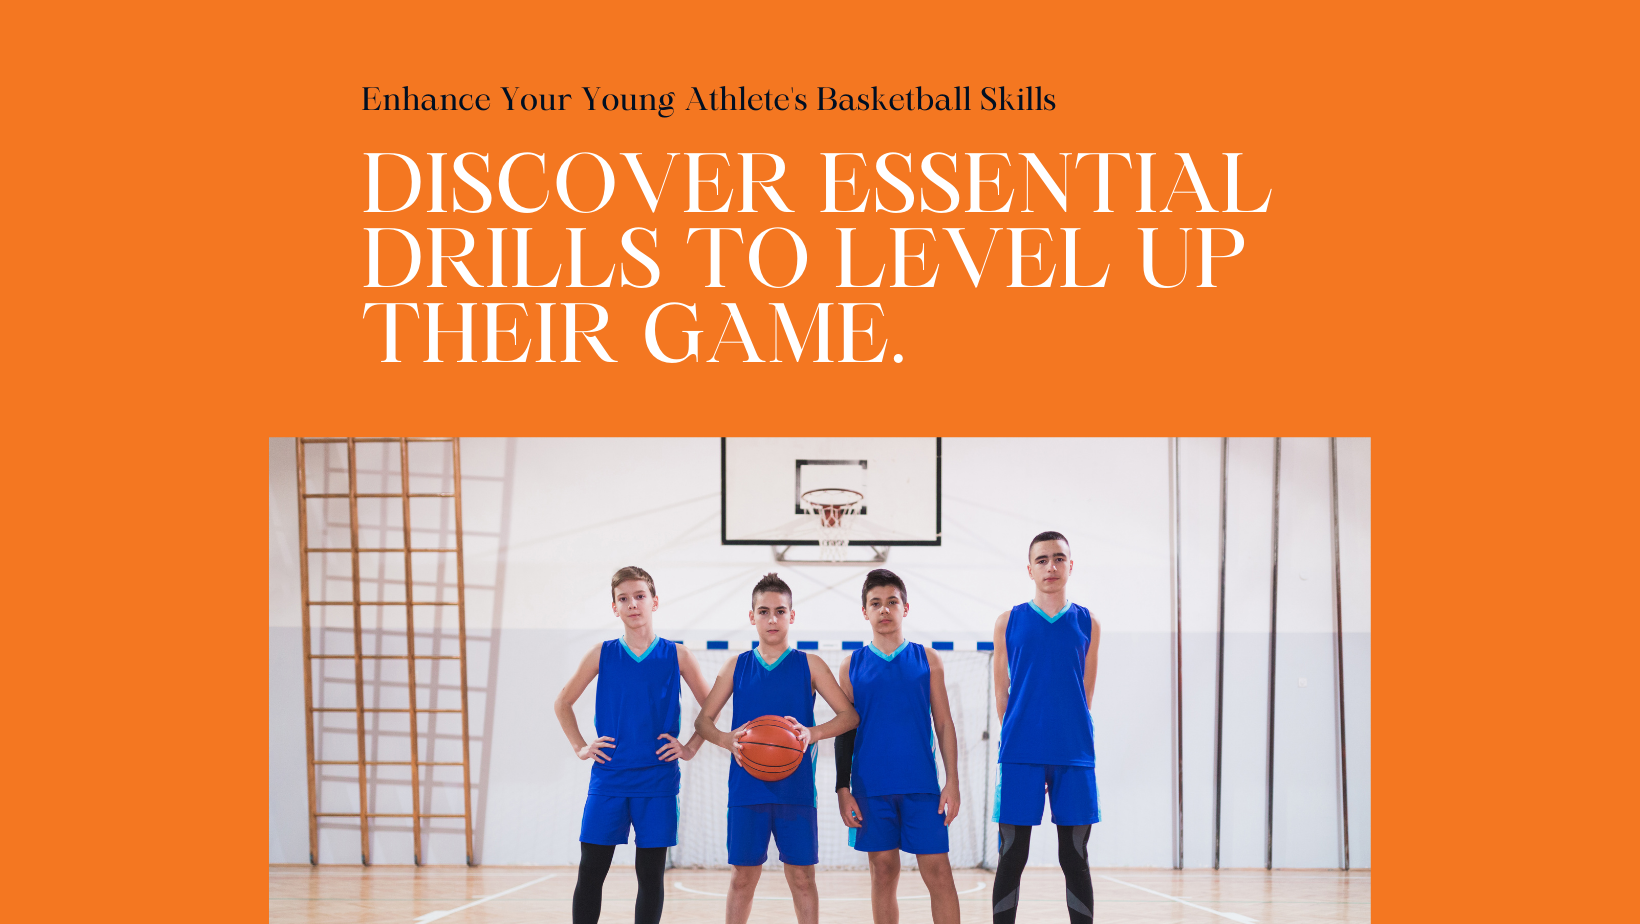 Boost Your Young Athlete's Game with Key Basketball Drills